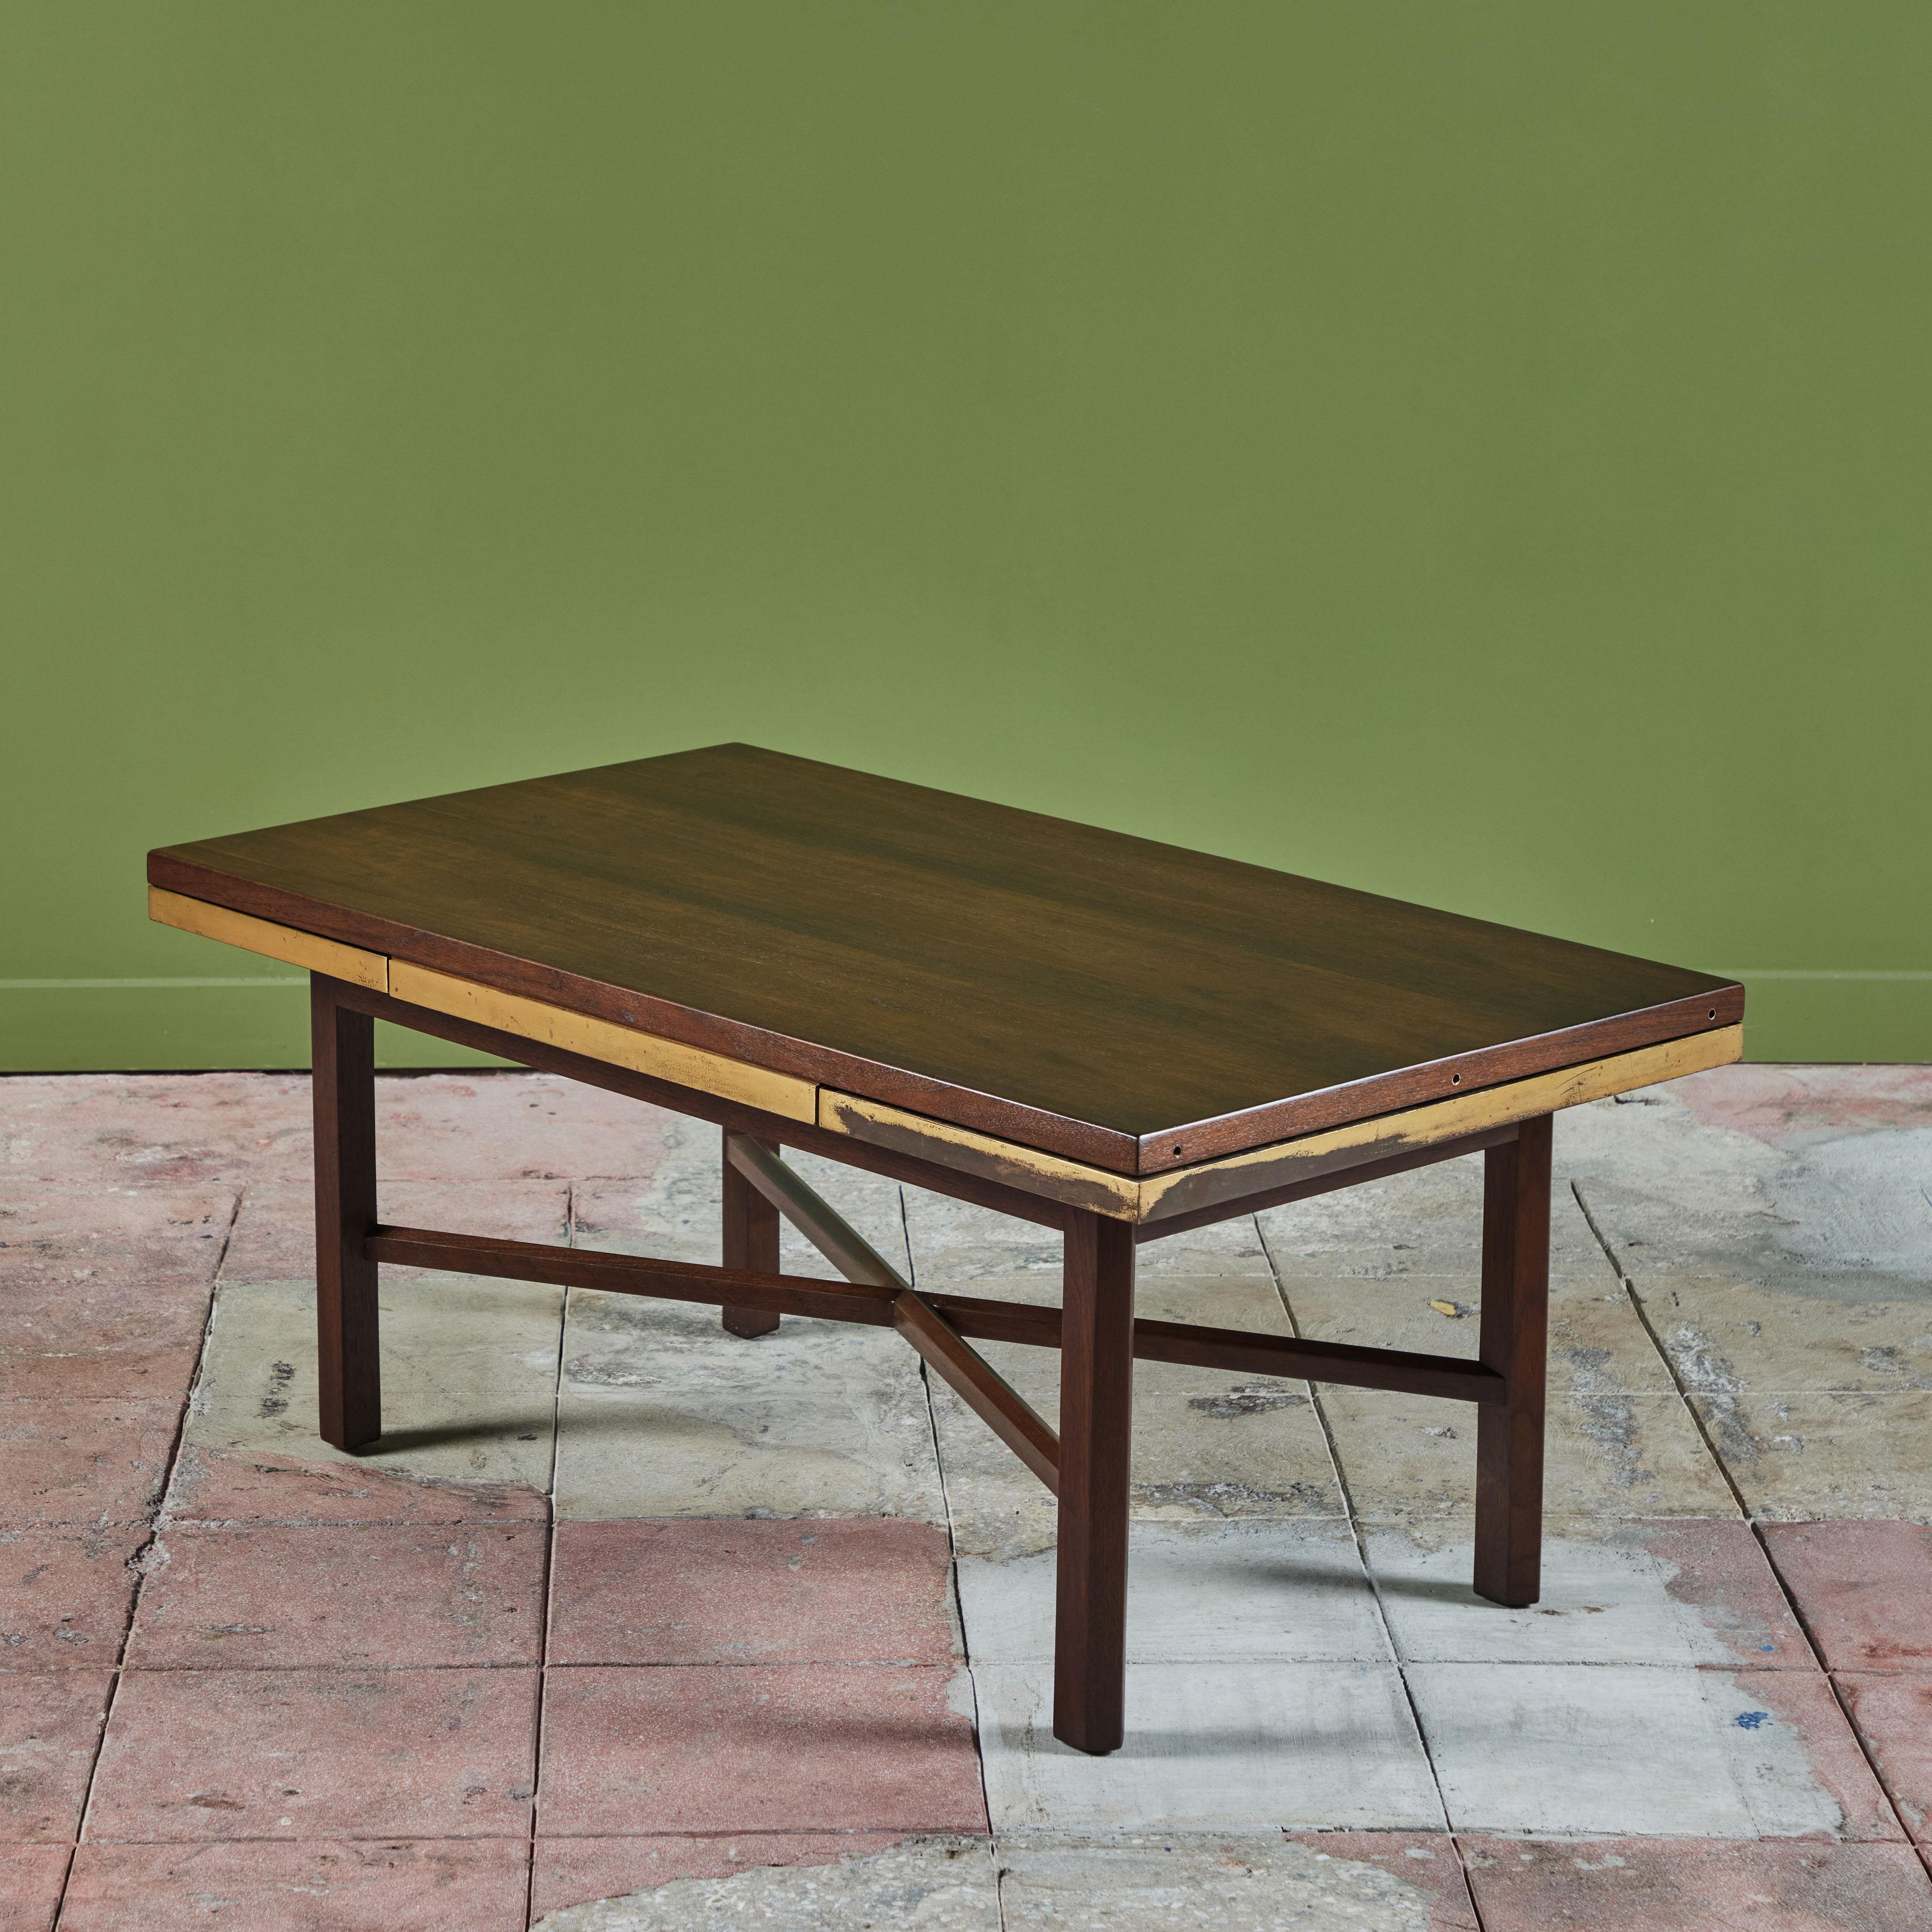 Edward Wormley Walnut Coffee Table with Stone Inlay for Dunbar In Excellent Condition For Sale In Los Angeles, CA